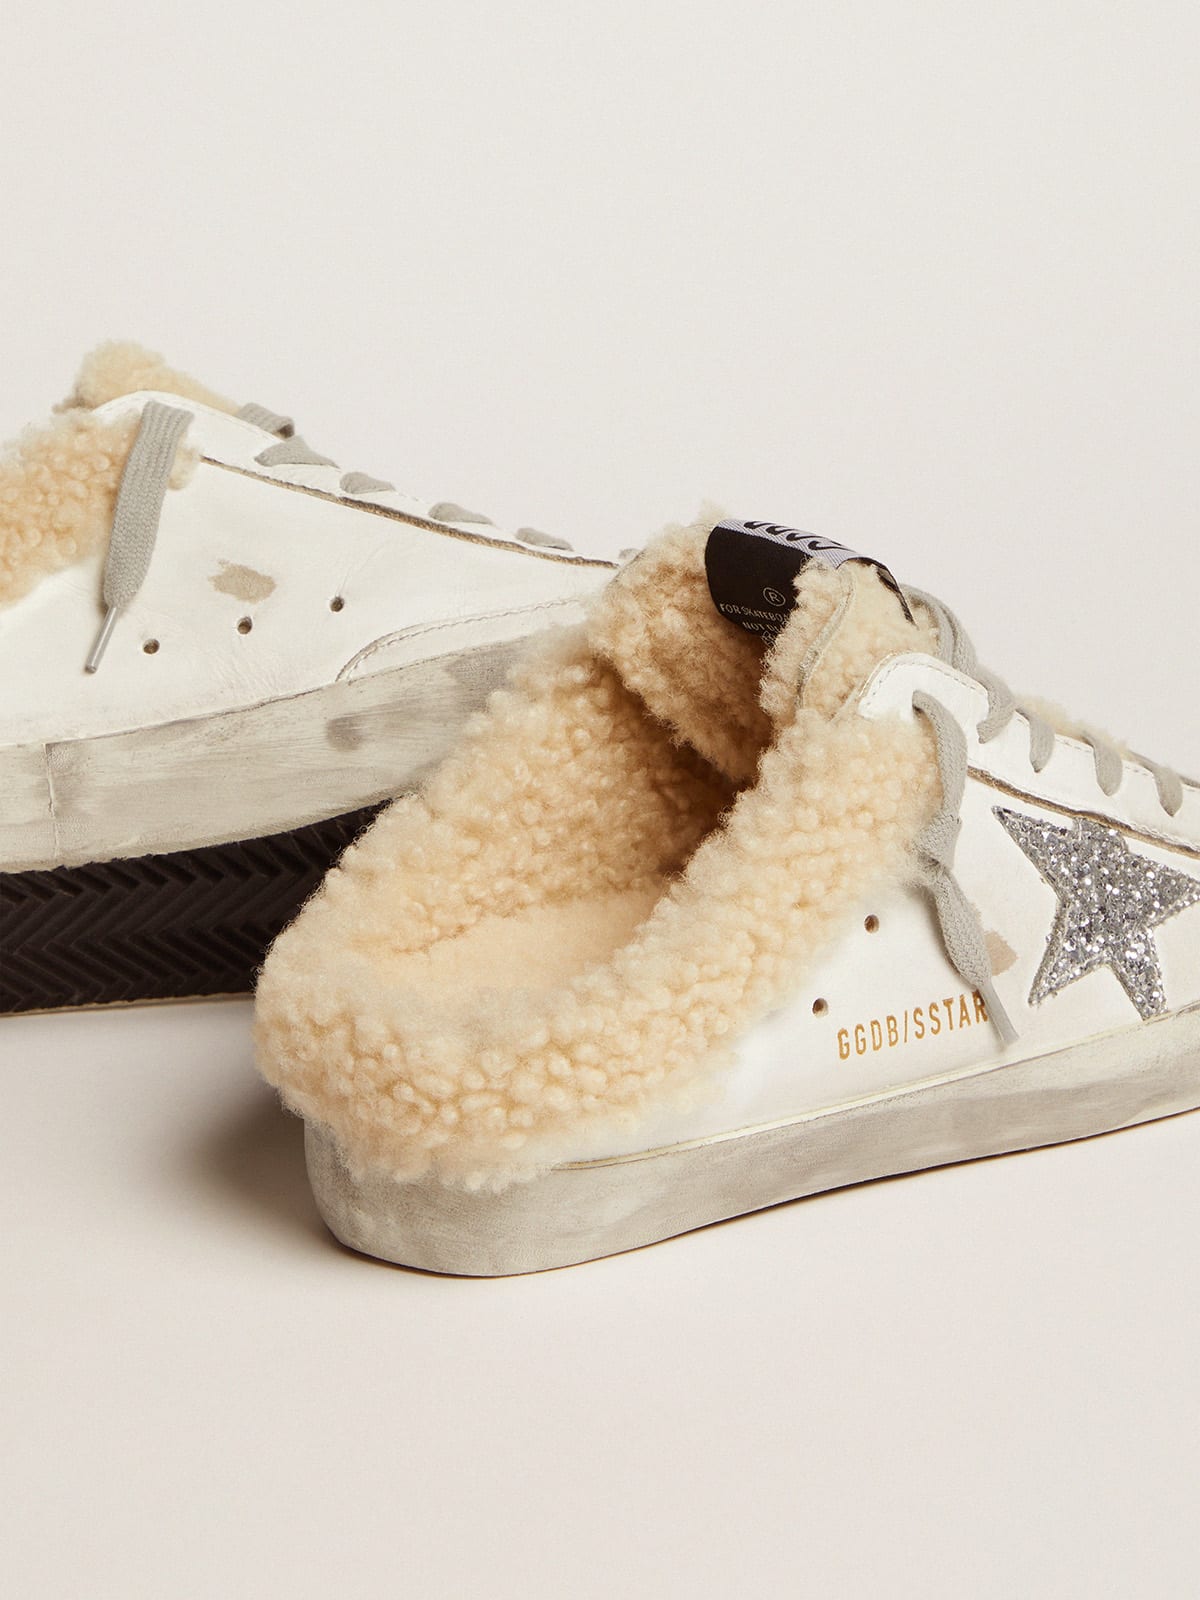 Golden Goose - Women's Super-Star Sabot in white leather and shearling lining in 